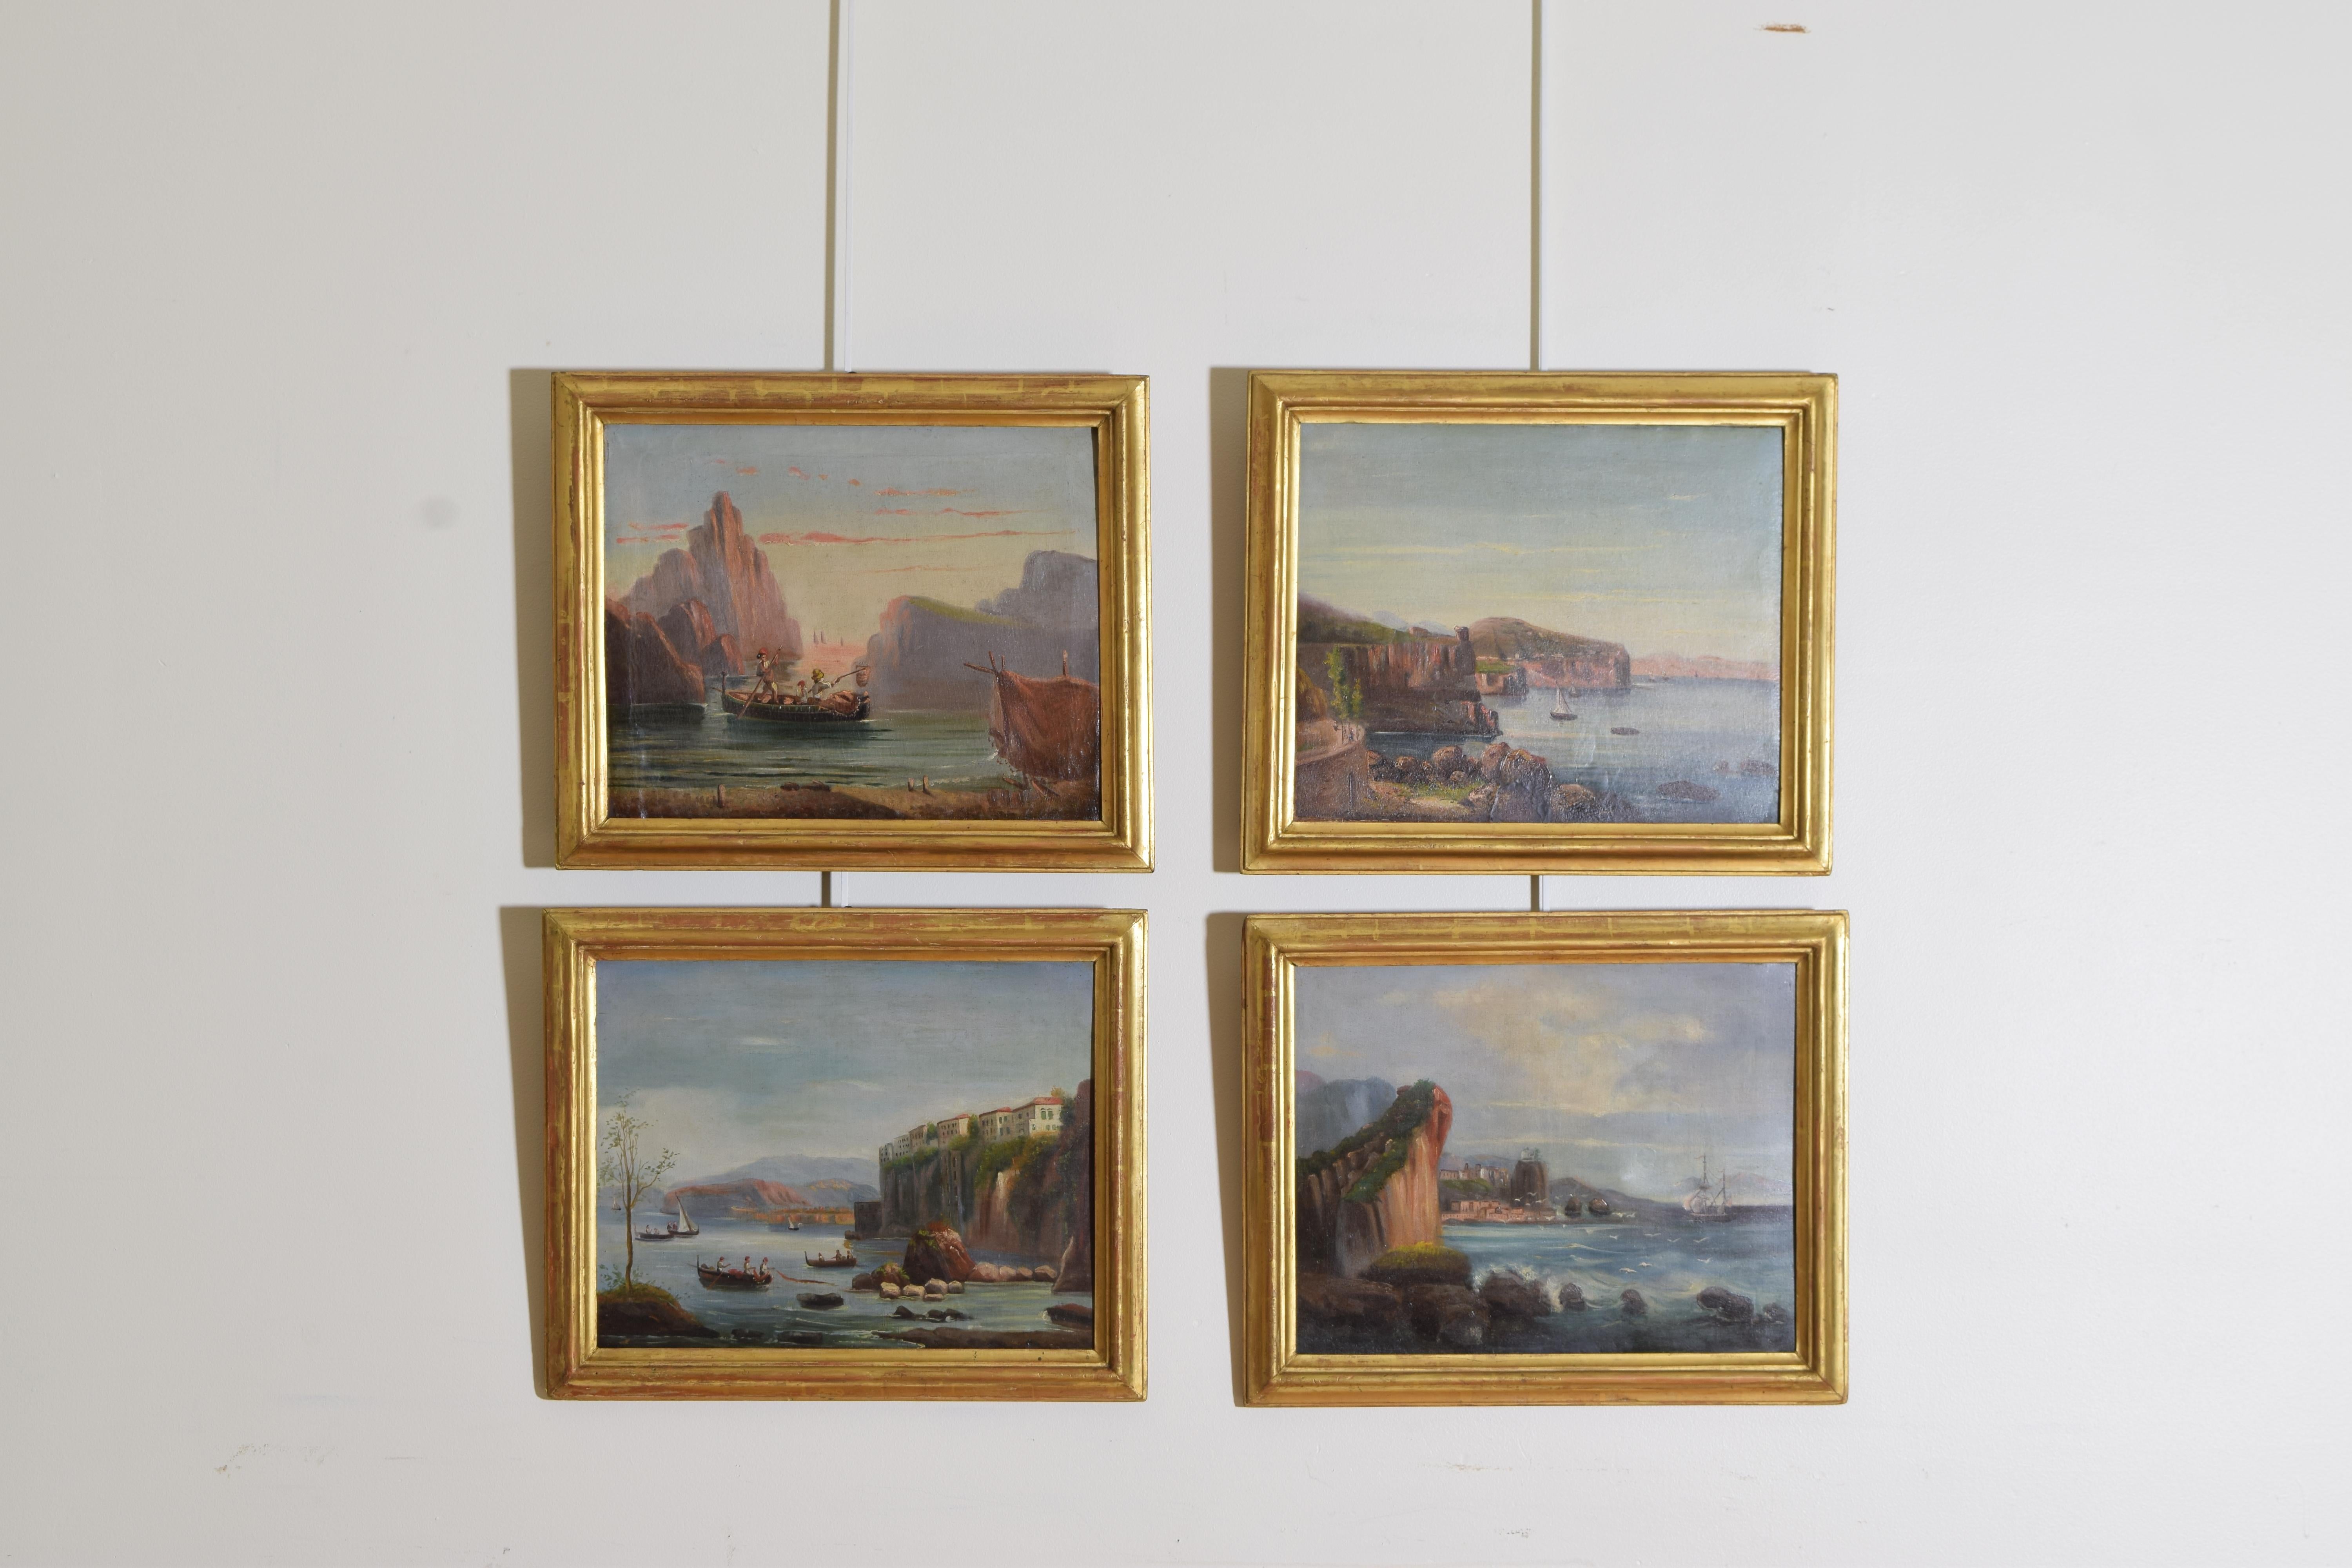 Four oil paintings depicting fishermen, boats, and the mountainous landscape of the Bay of Naples near Palermo, Italy. They are framed in period giltwood frames from the early 1800's.